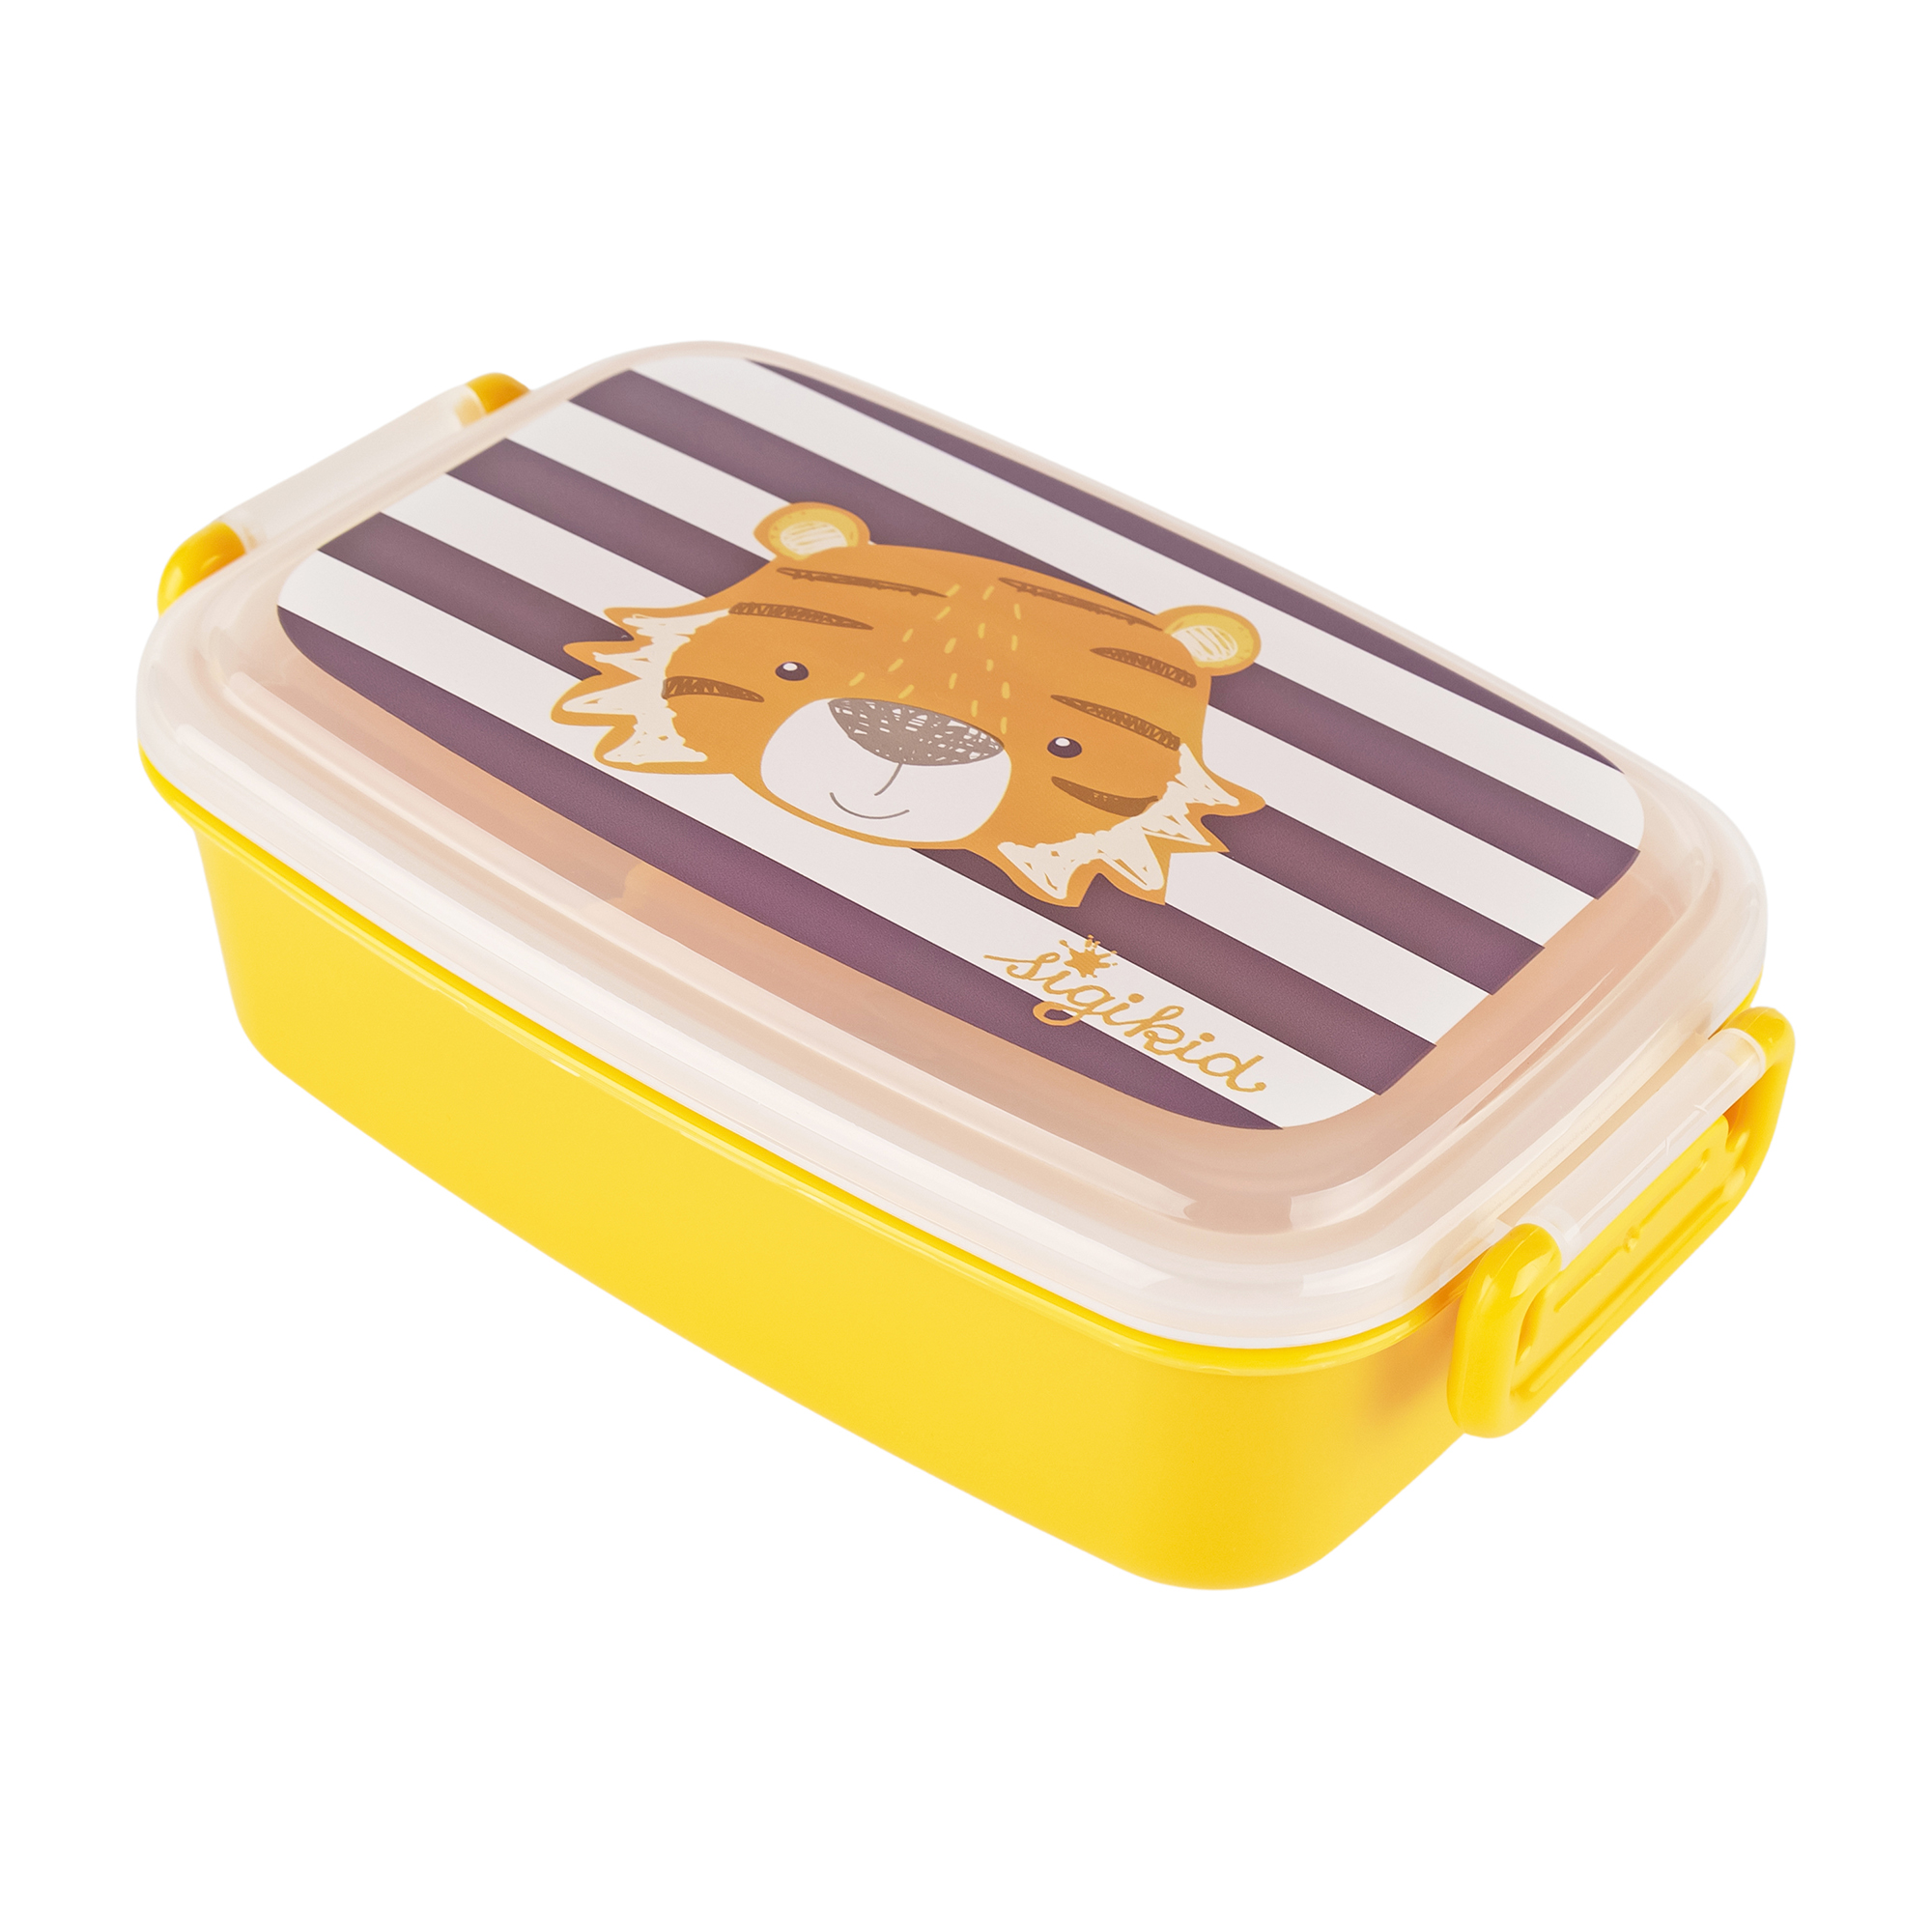 Lunchbox tiger, removable partition inside